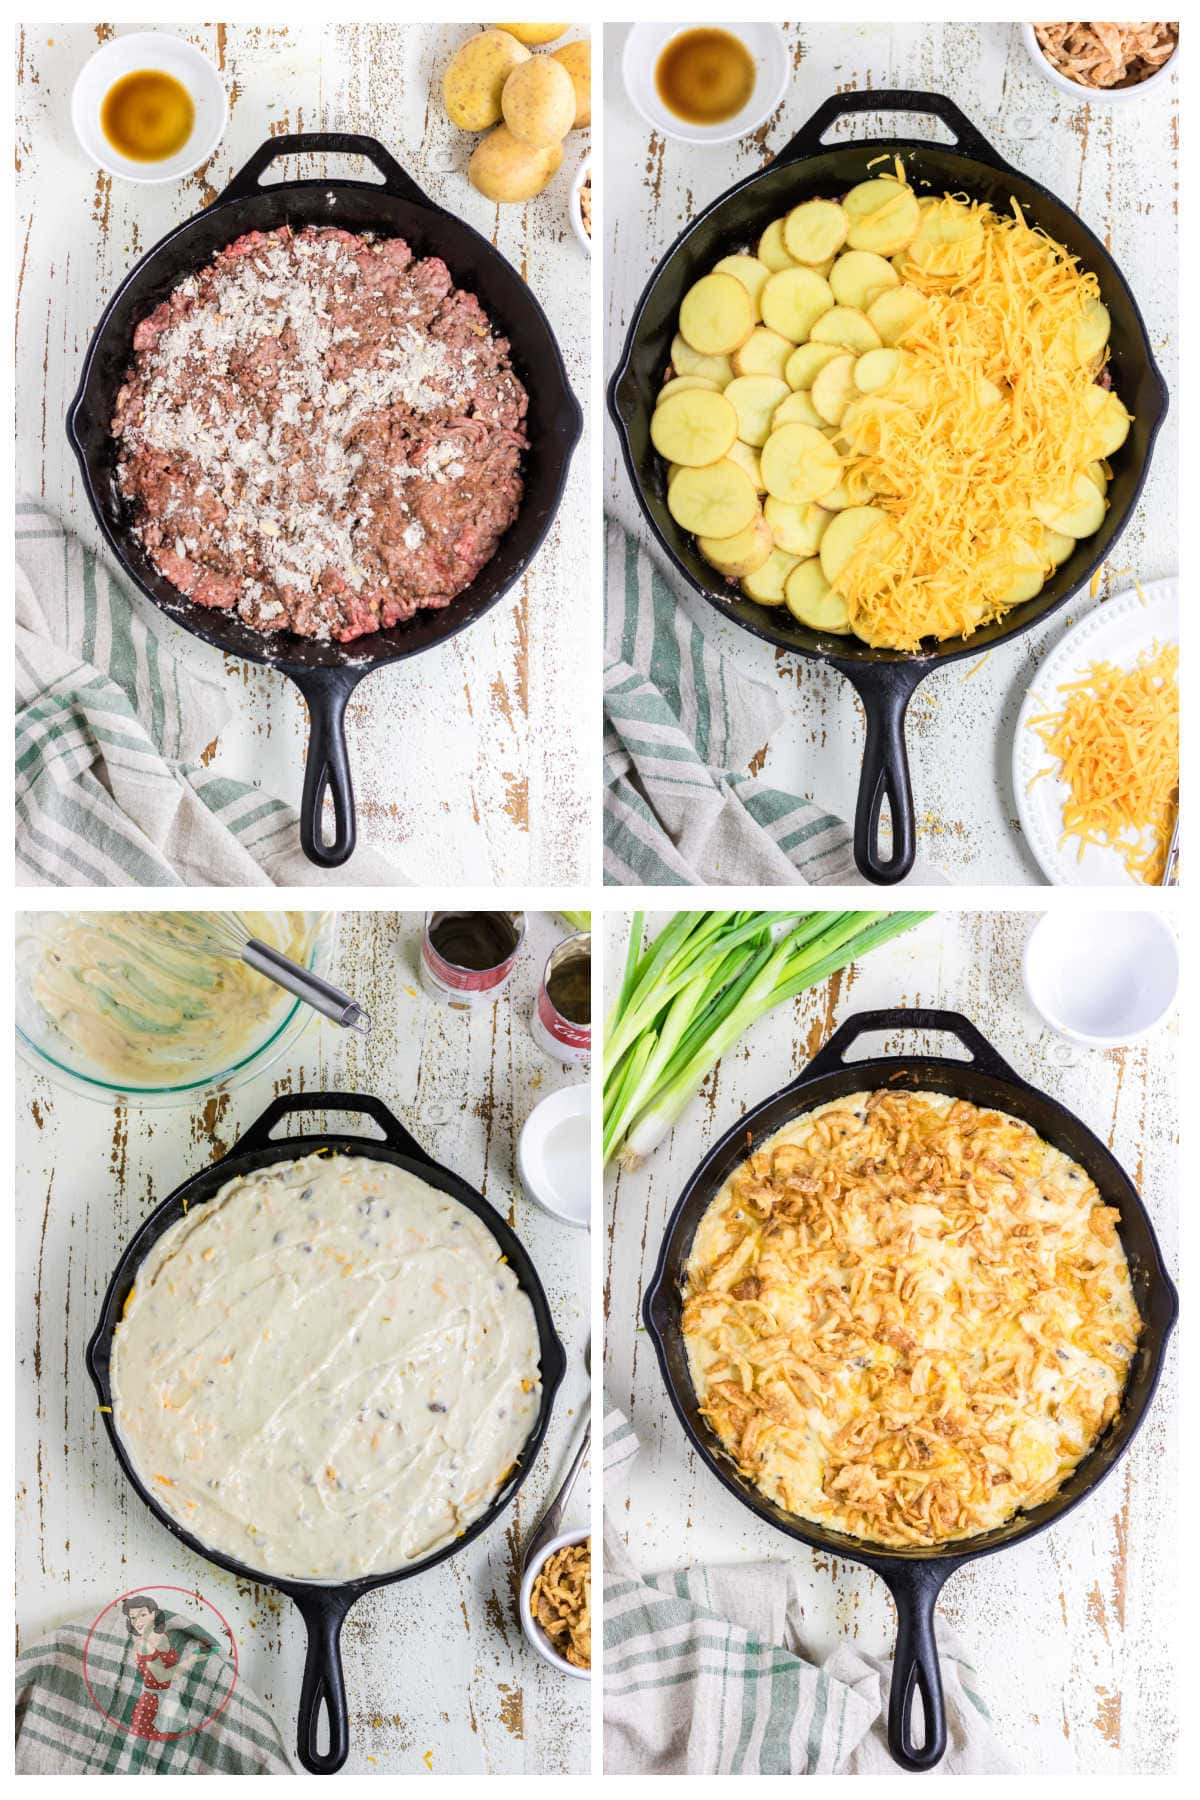 Step by step images showing how to make hobo casserole.